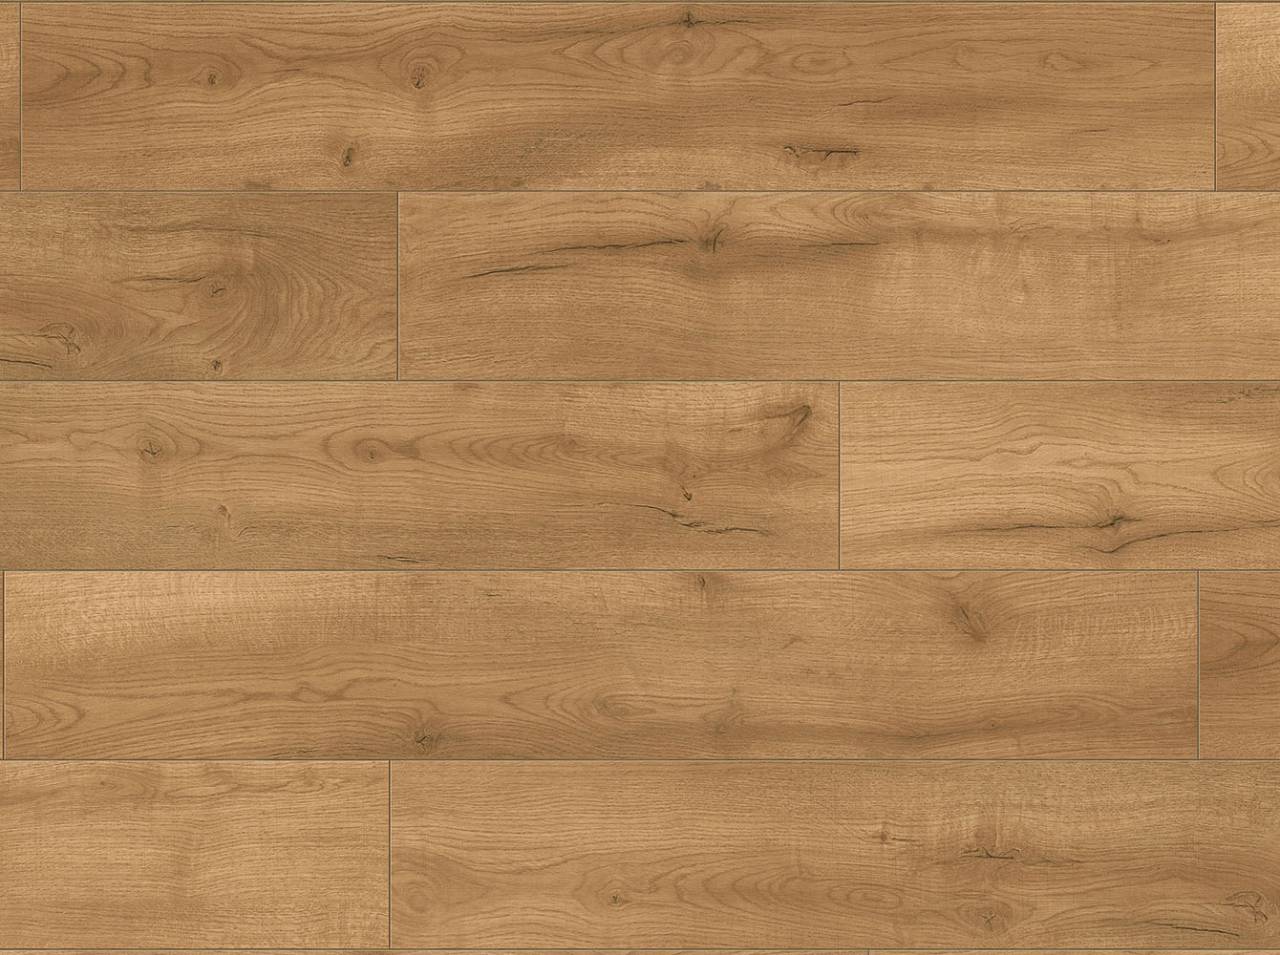 Close-up of Z209 Butterscotch Oak product, featuring warm tones and distinct wood grain patterns.